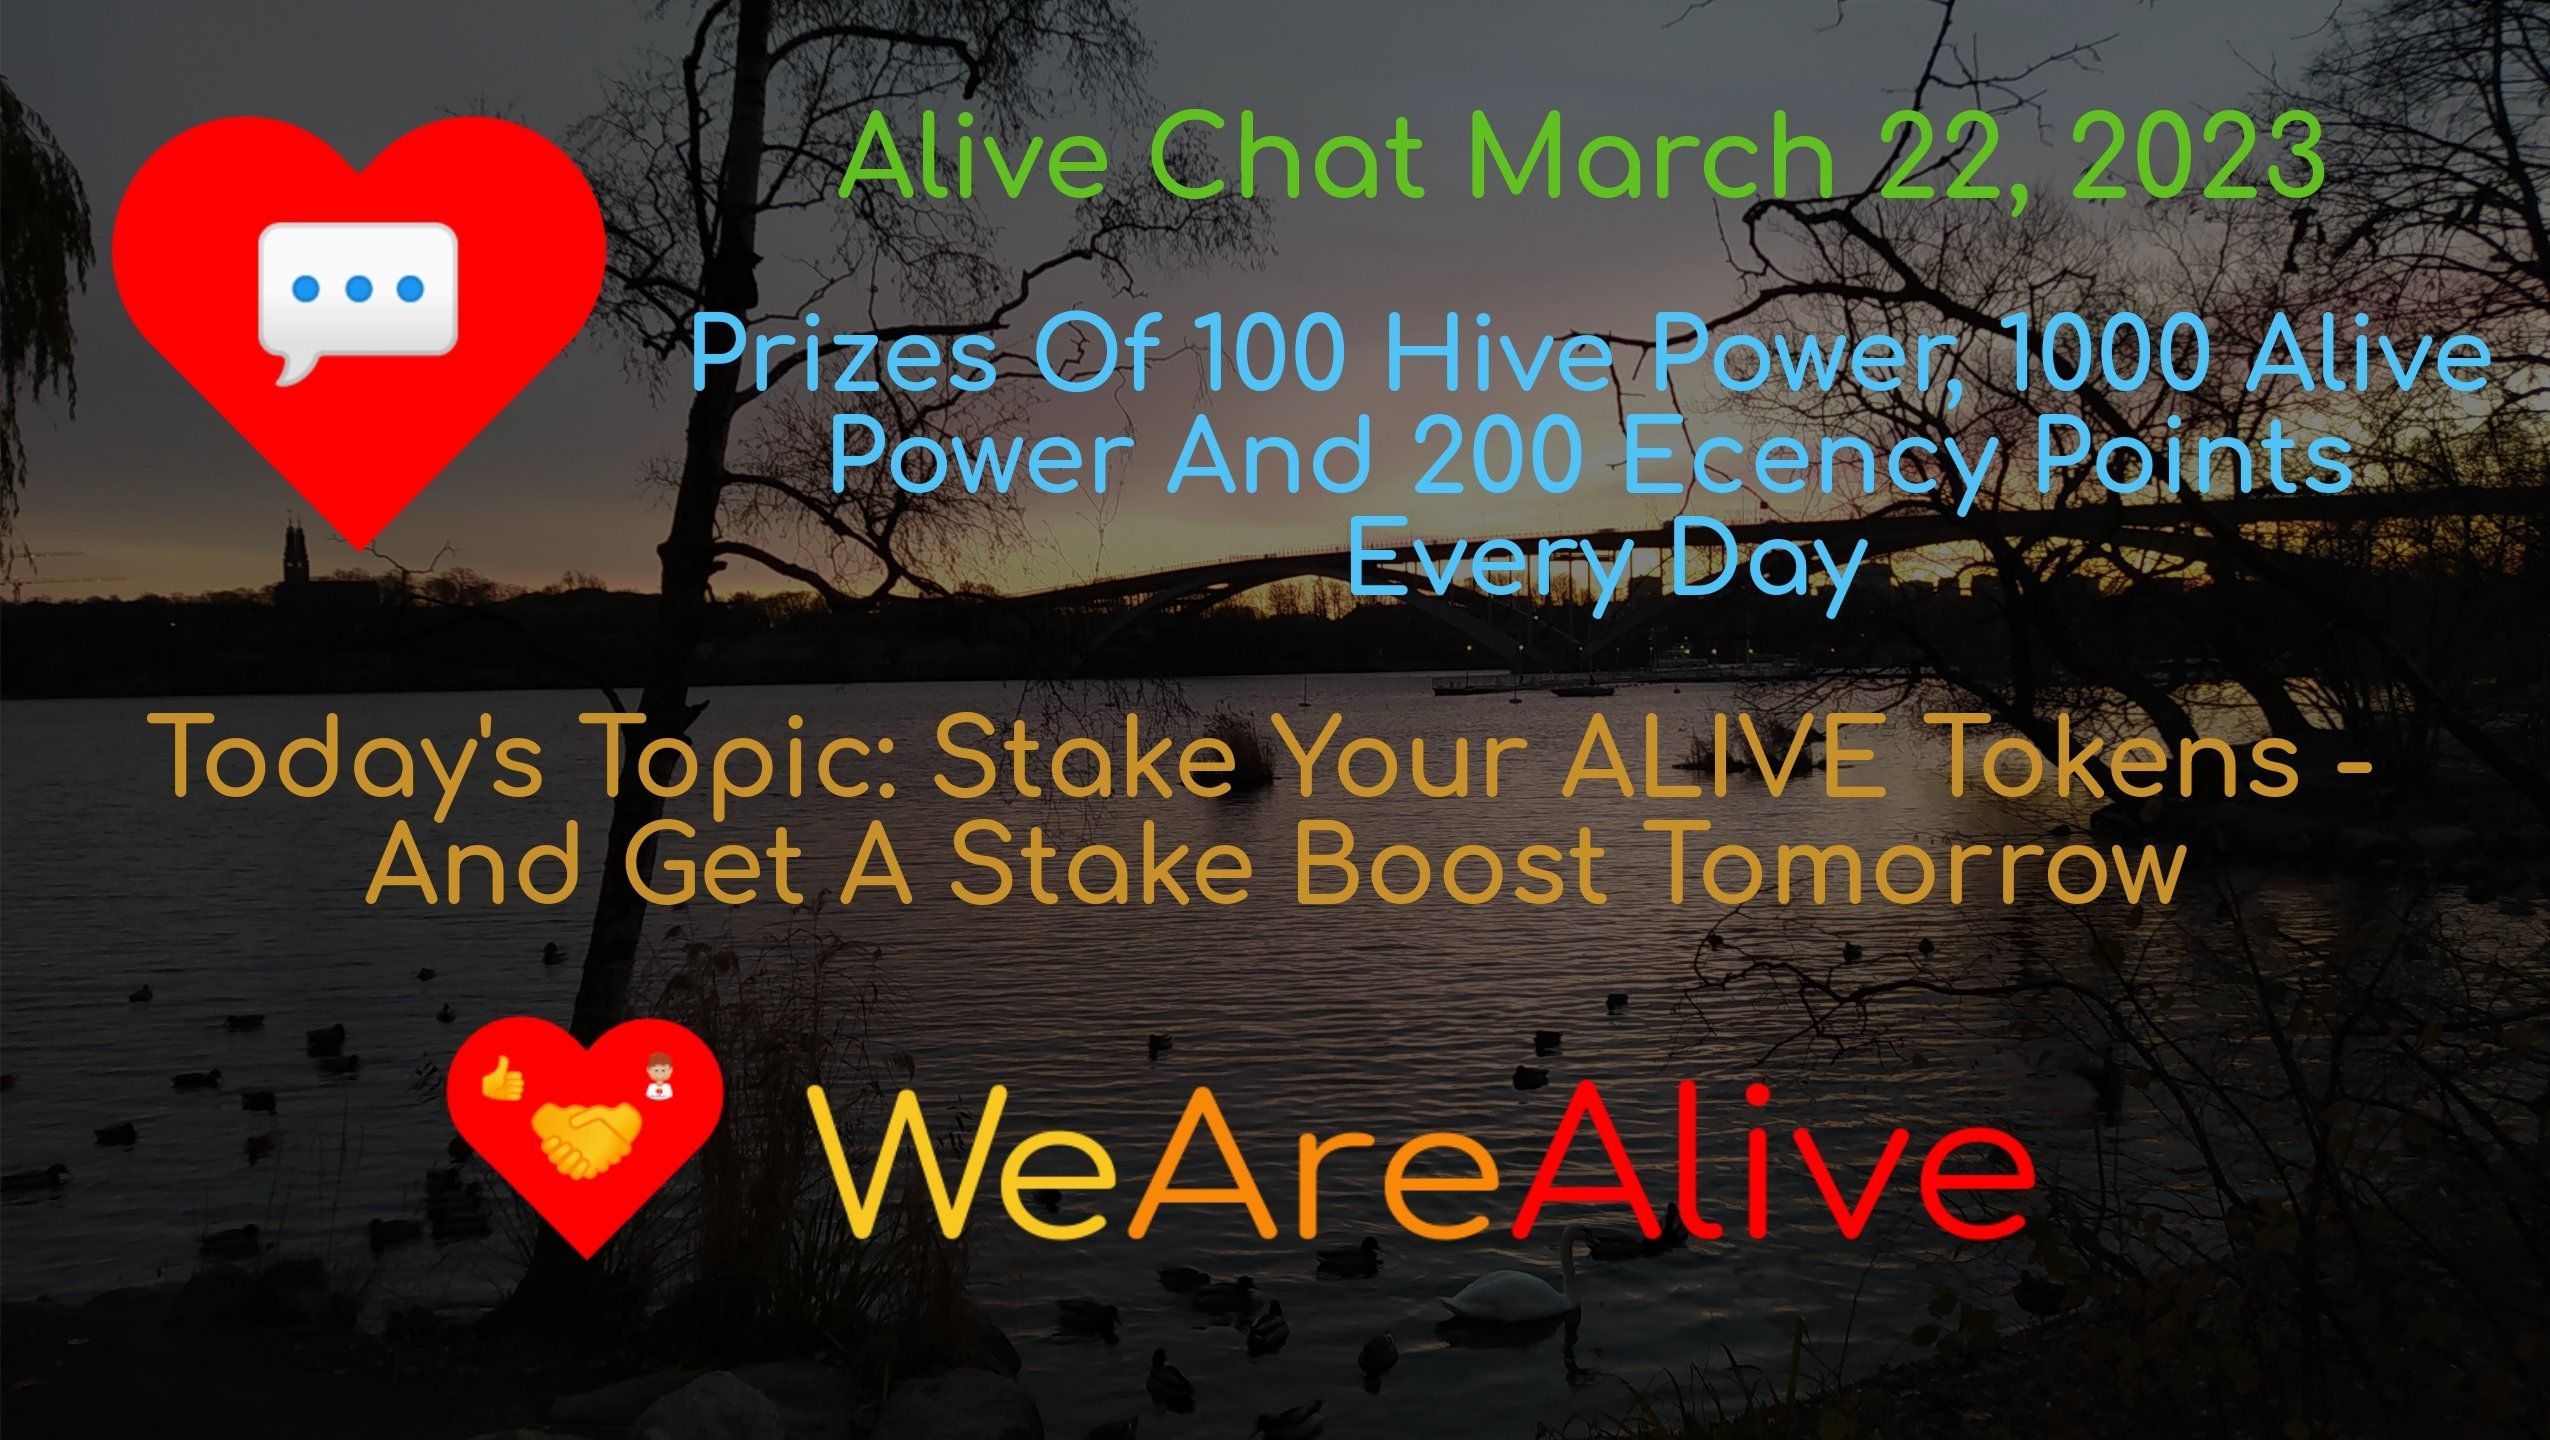 @alive.chat/alive-chat-march-21-2023